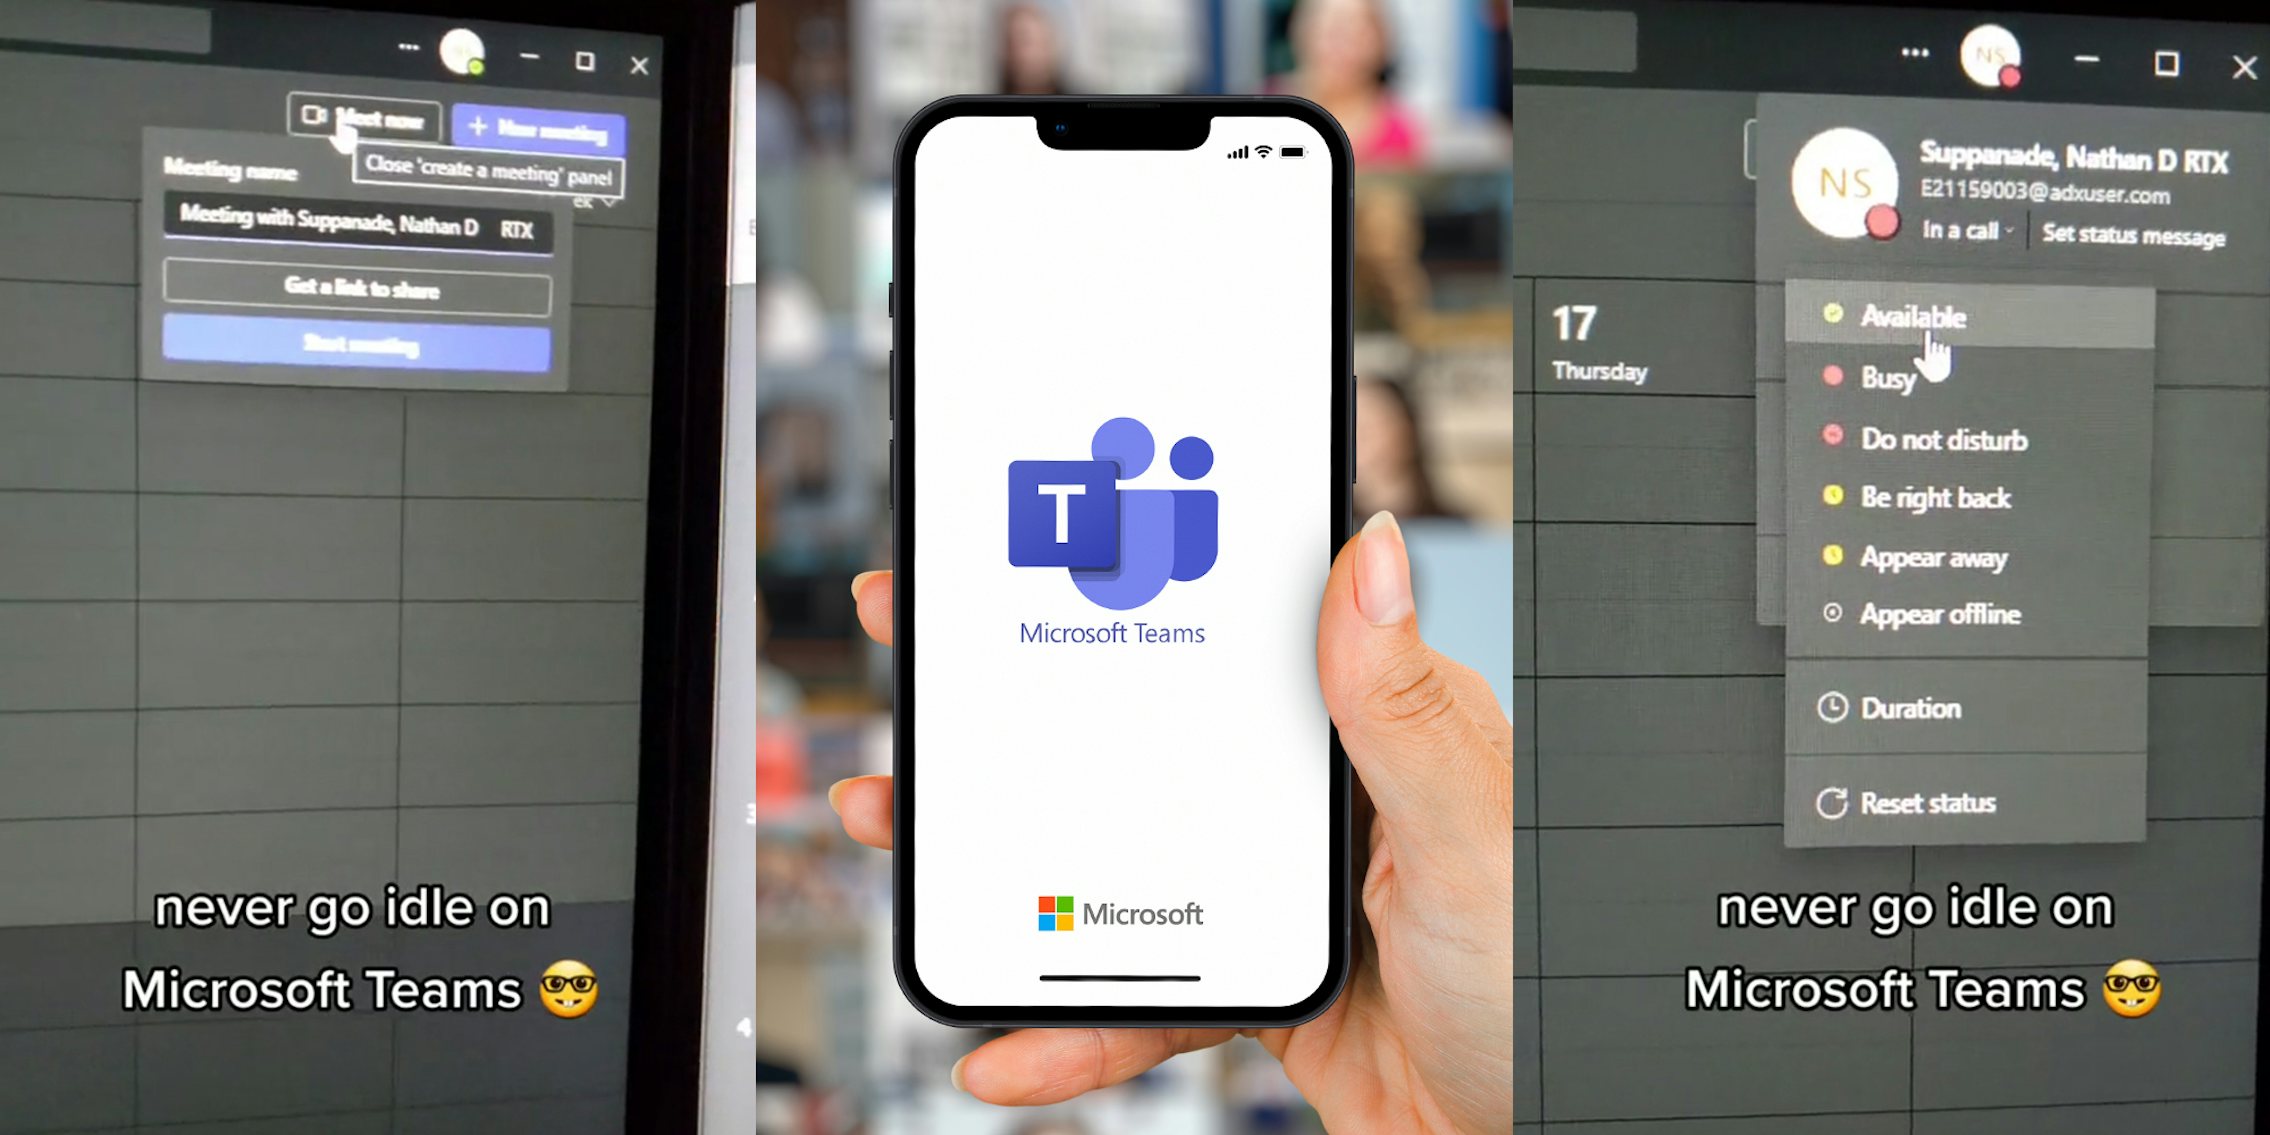 Microsoft teams with mouse on 'meet now' caption 'never go idle in Microsoft Teams' (l) Microsoft Teams on phone in hand in front of team call (c) Microsoft Teams with mouse on 'Available' caption 'never go idle on Microsoft Teams' (r)